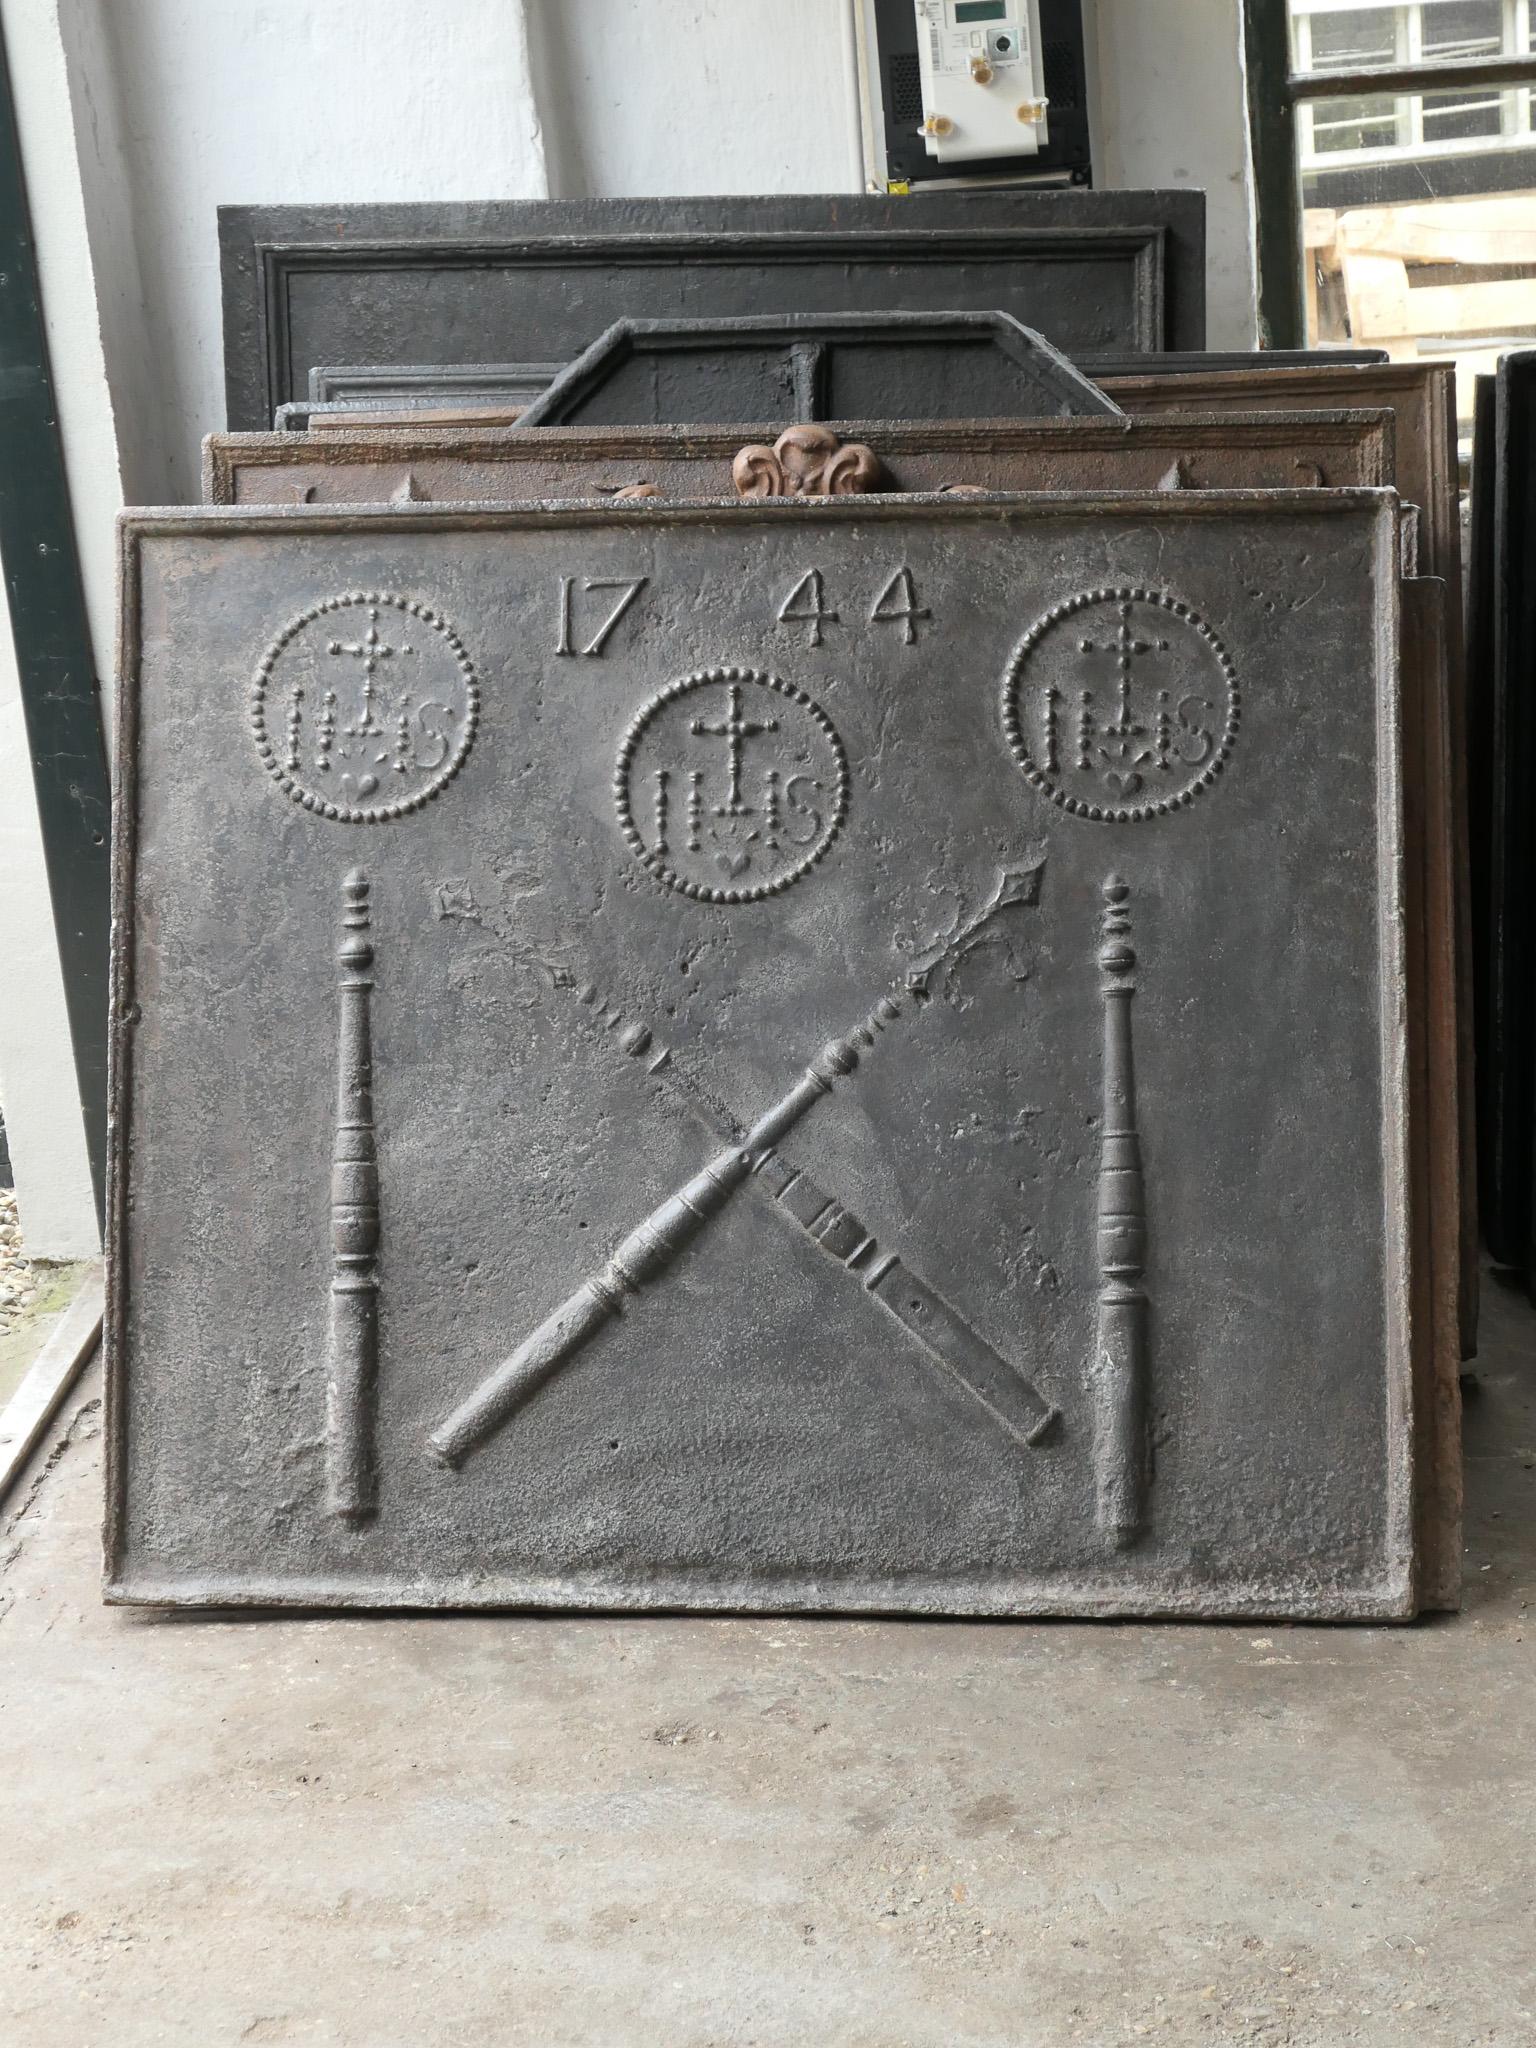 Large 18th century French Louis XIV fireback with two pillars, a IHS monogram and the date of production 1744.

The monogram IHS stands for Iesus Hominum Salvator (Jesus the Savior of Humanity) or In Hoc Signo (In this sign will you win). The